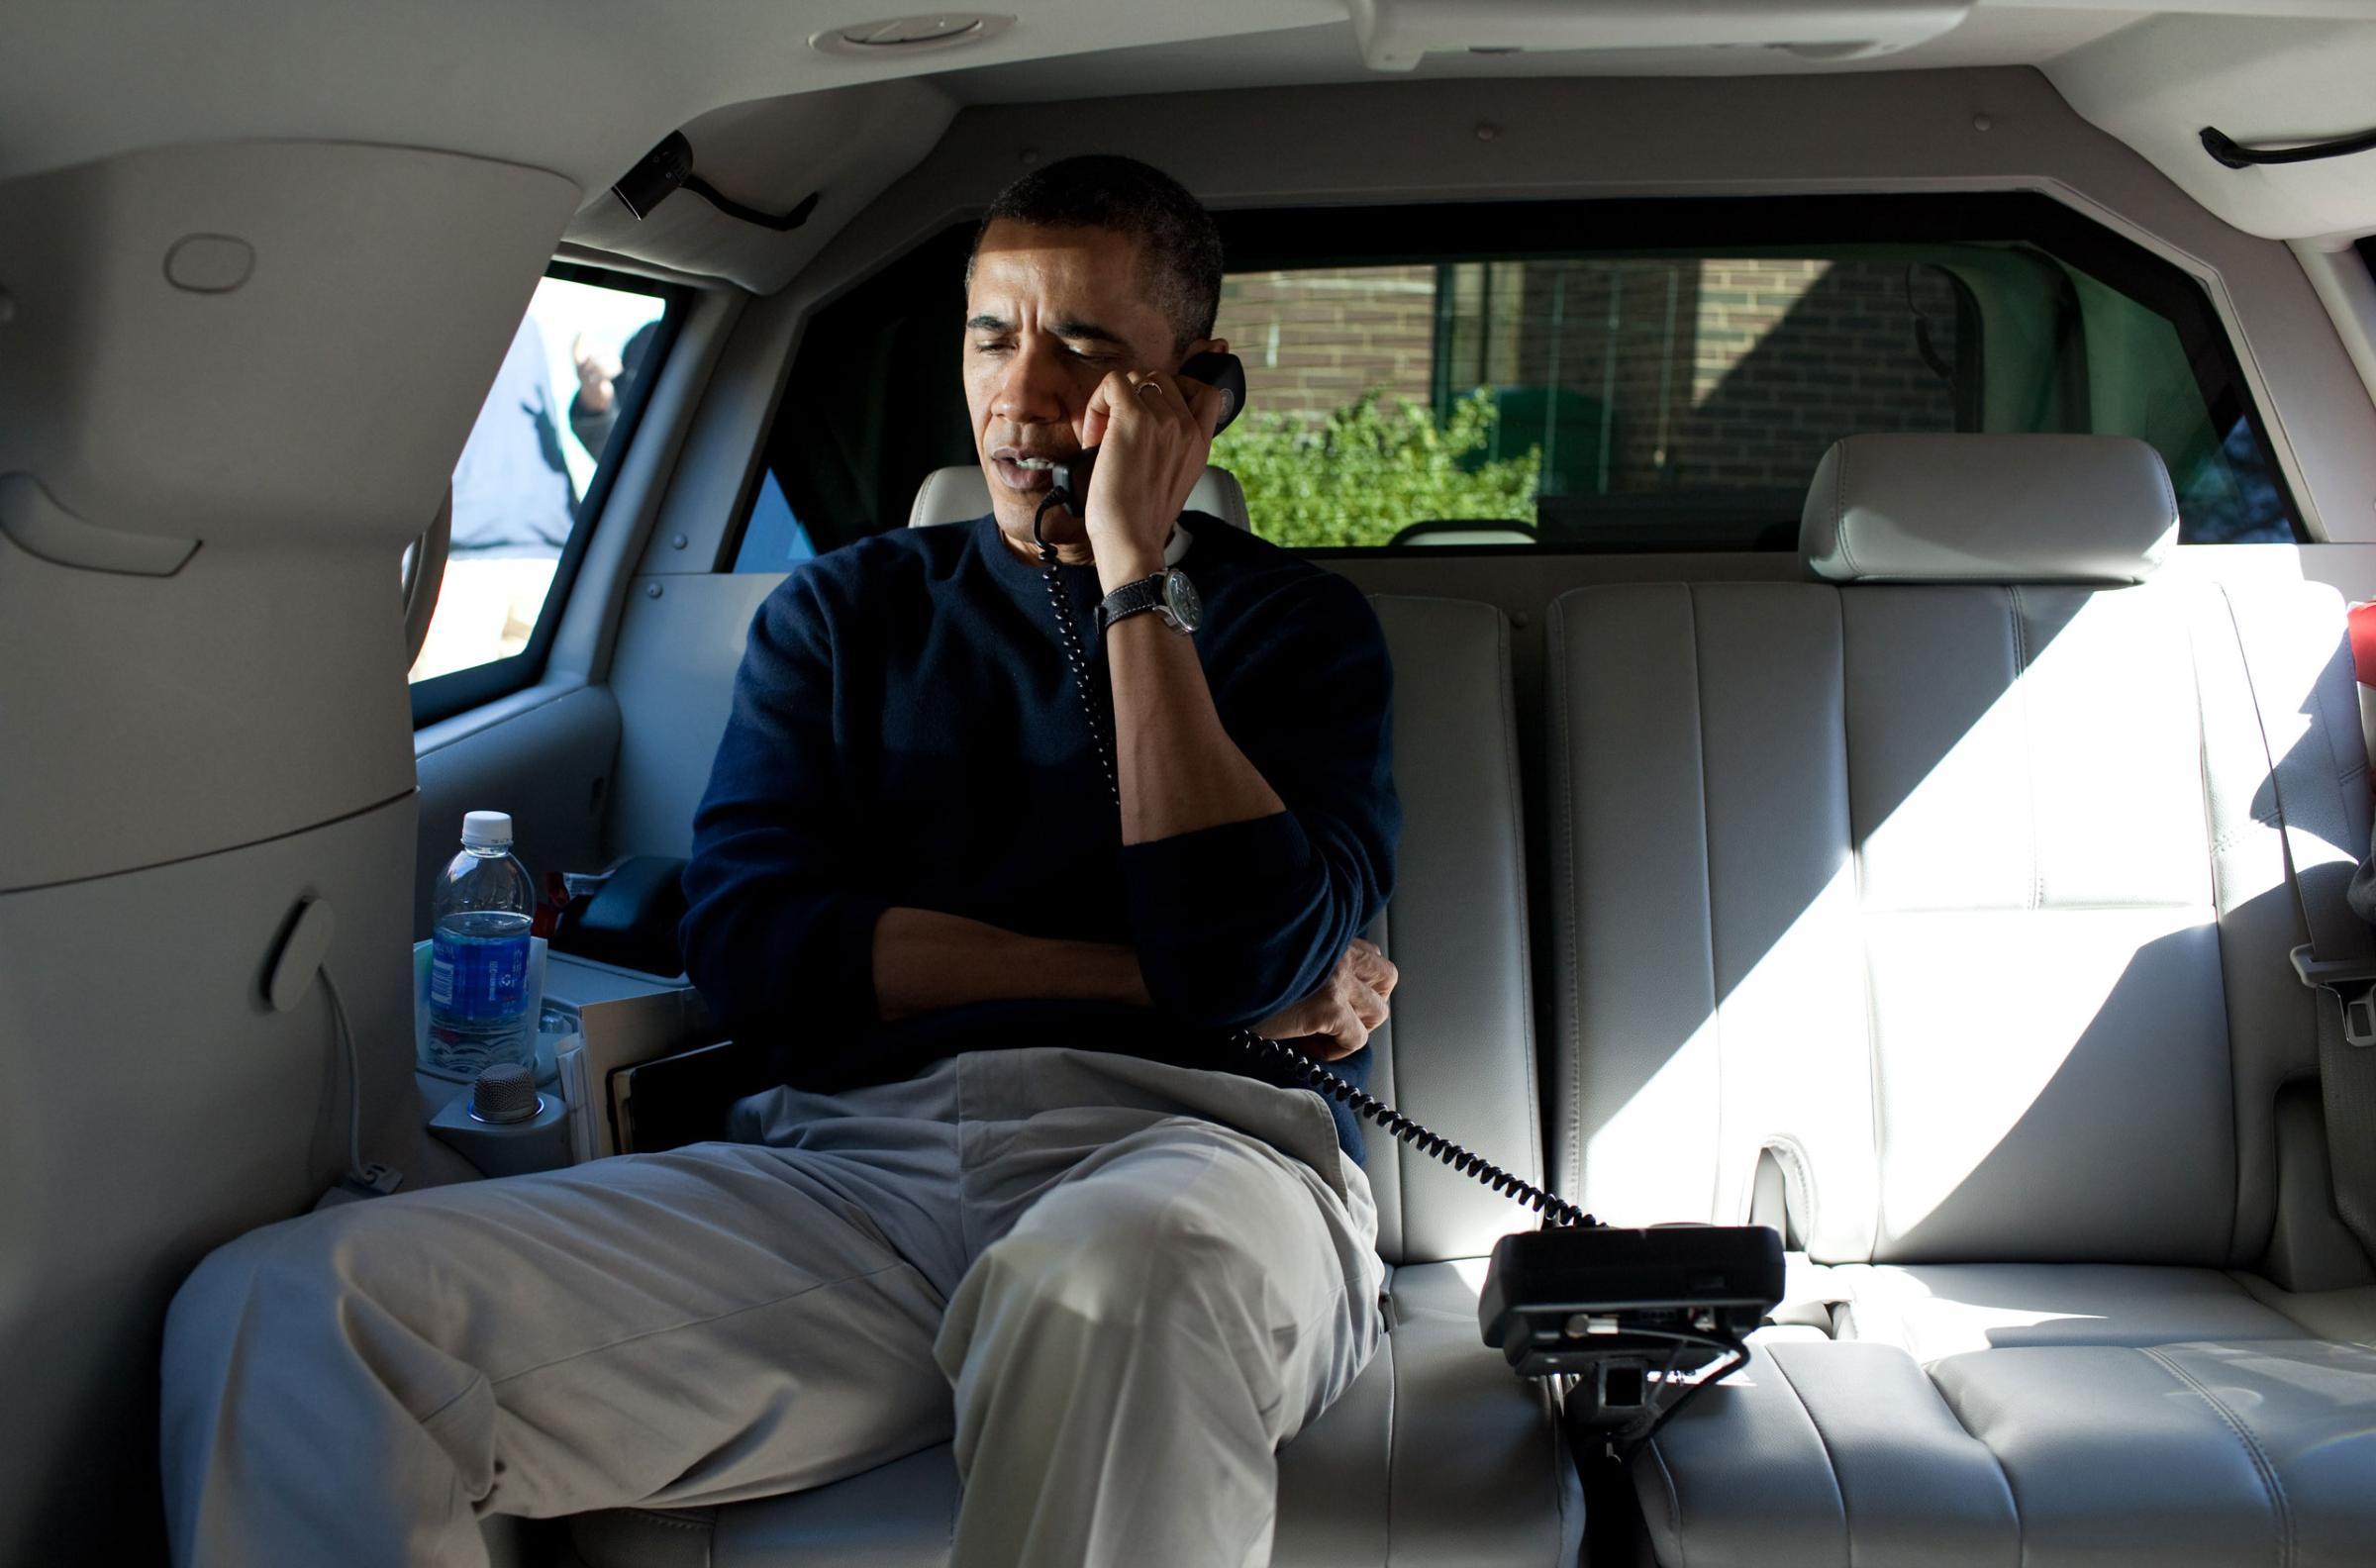 President Barack Obama talks on the phone with Afghanistan President Hamid Karzai from his vehicle outside the Jane E. Lawton Community Center in Chevy Chase, Maryland, Sunday, March 11, 2012.